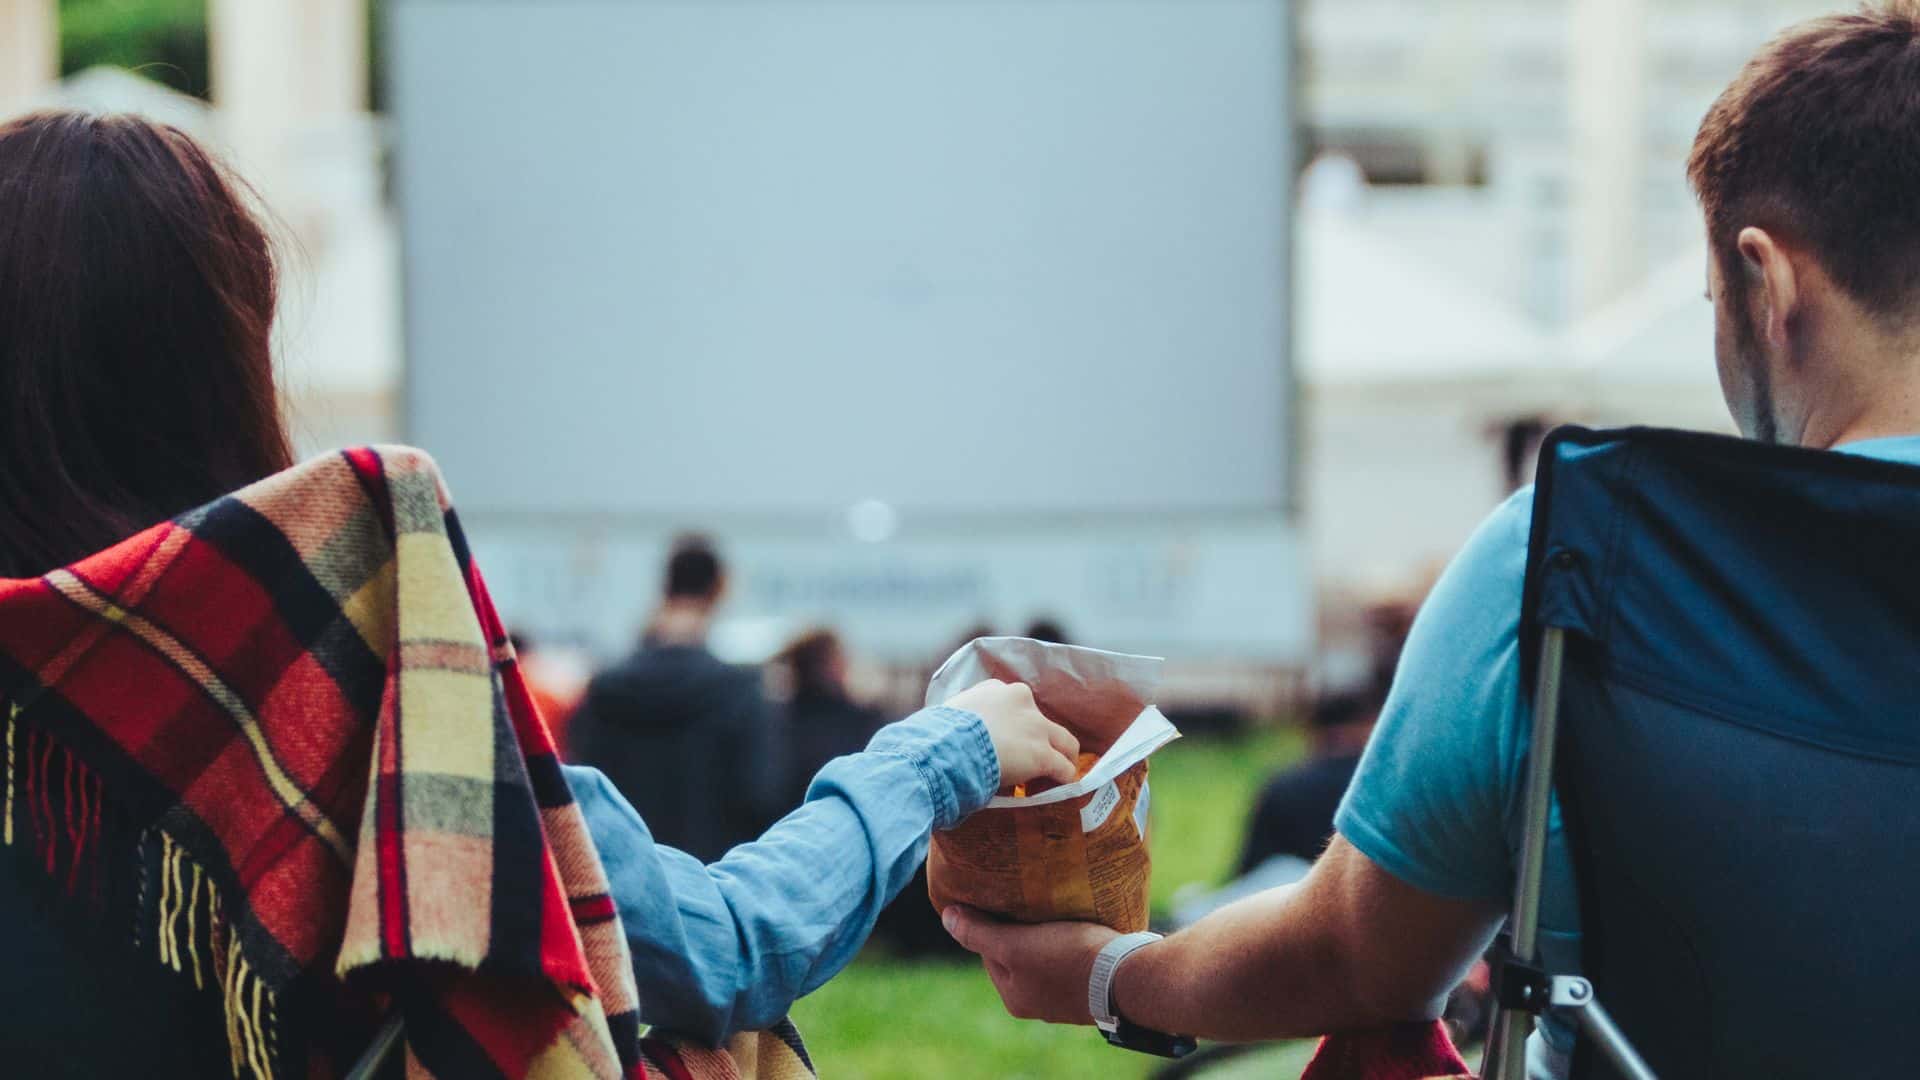 A couple share snacks in front of a cinema screen in a city park.